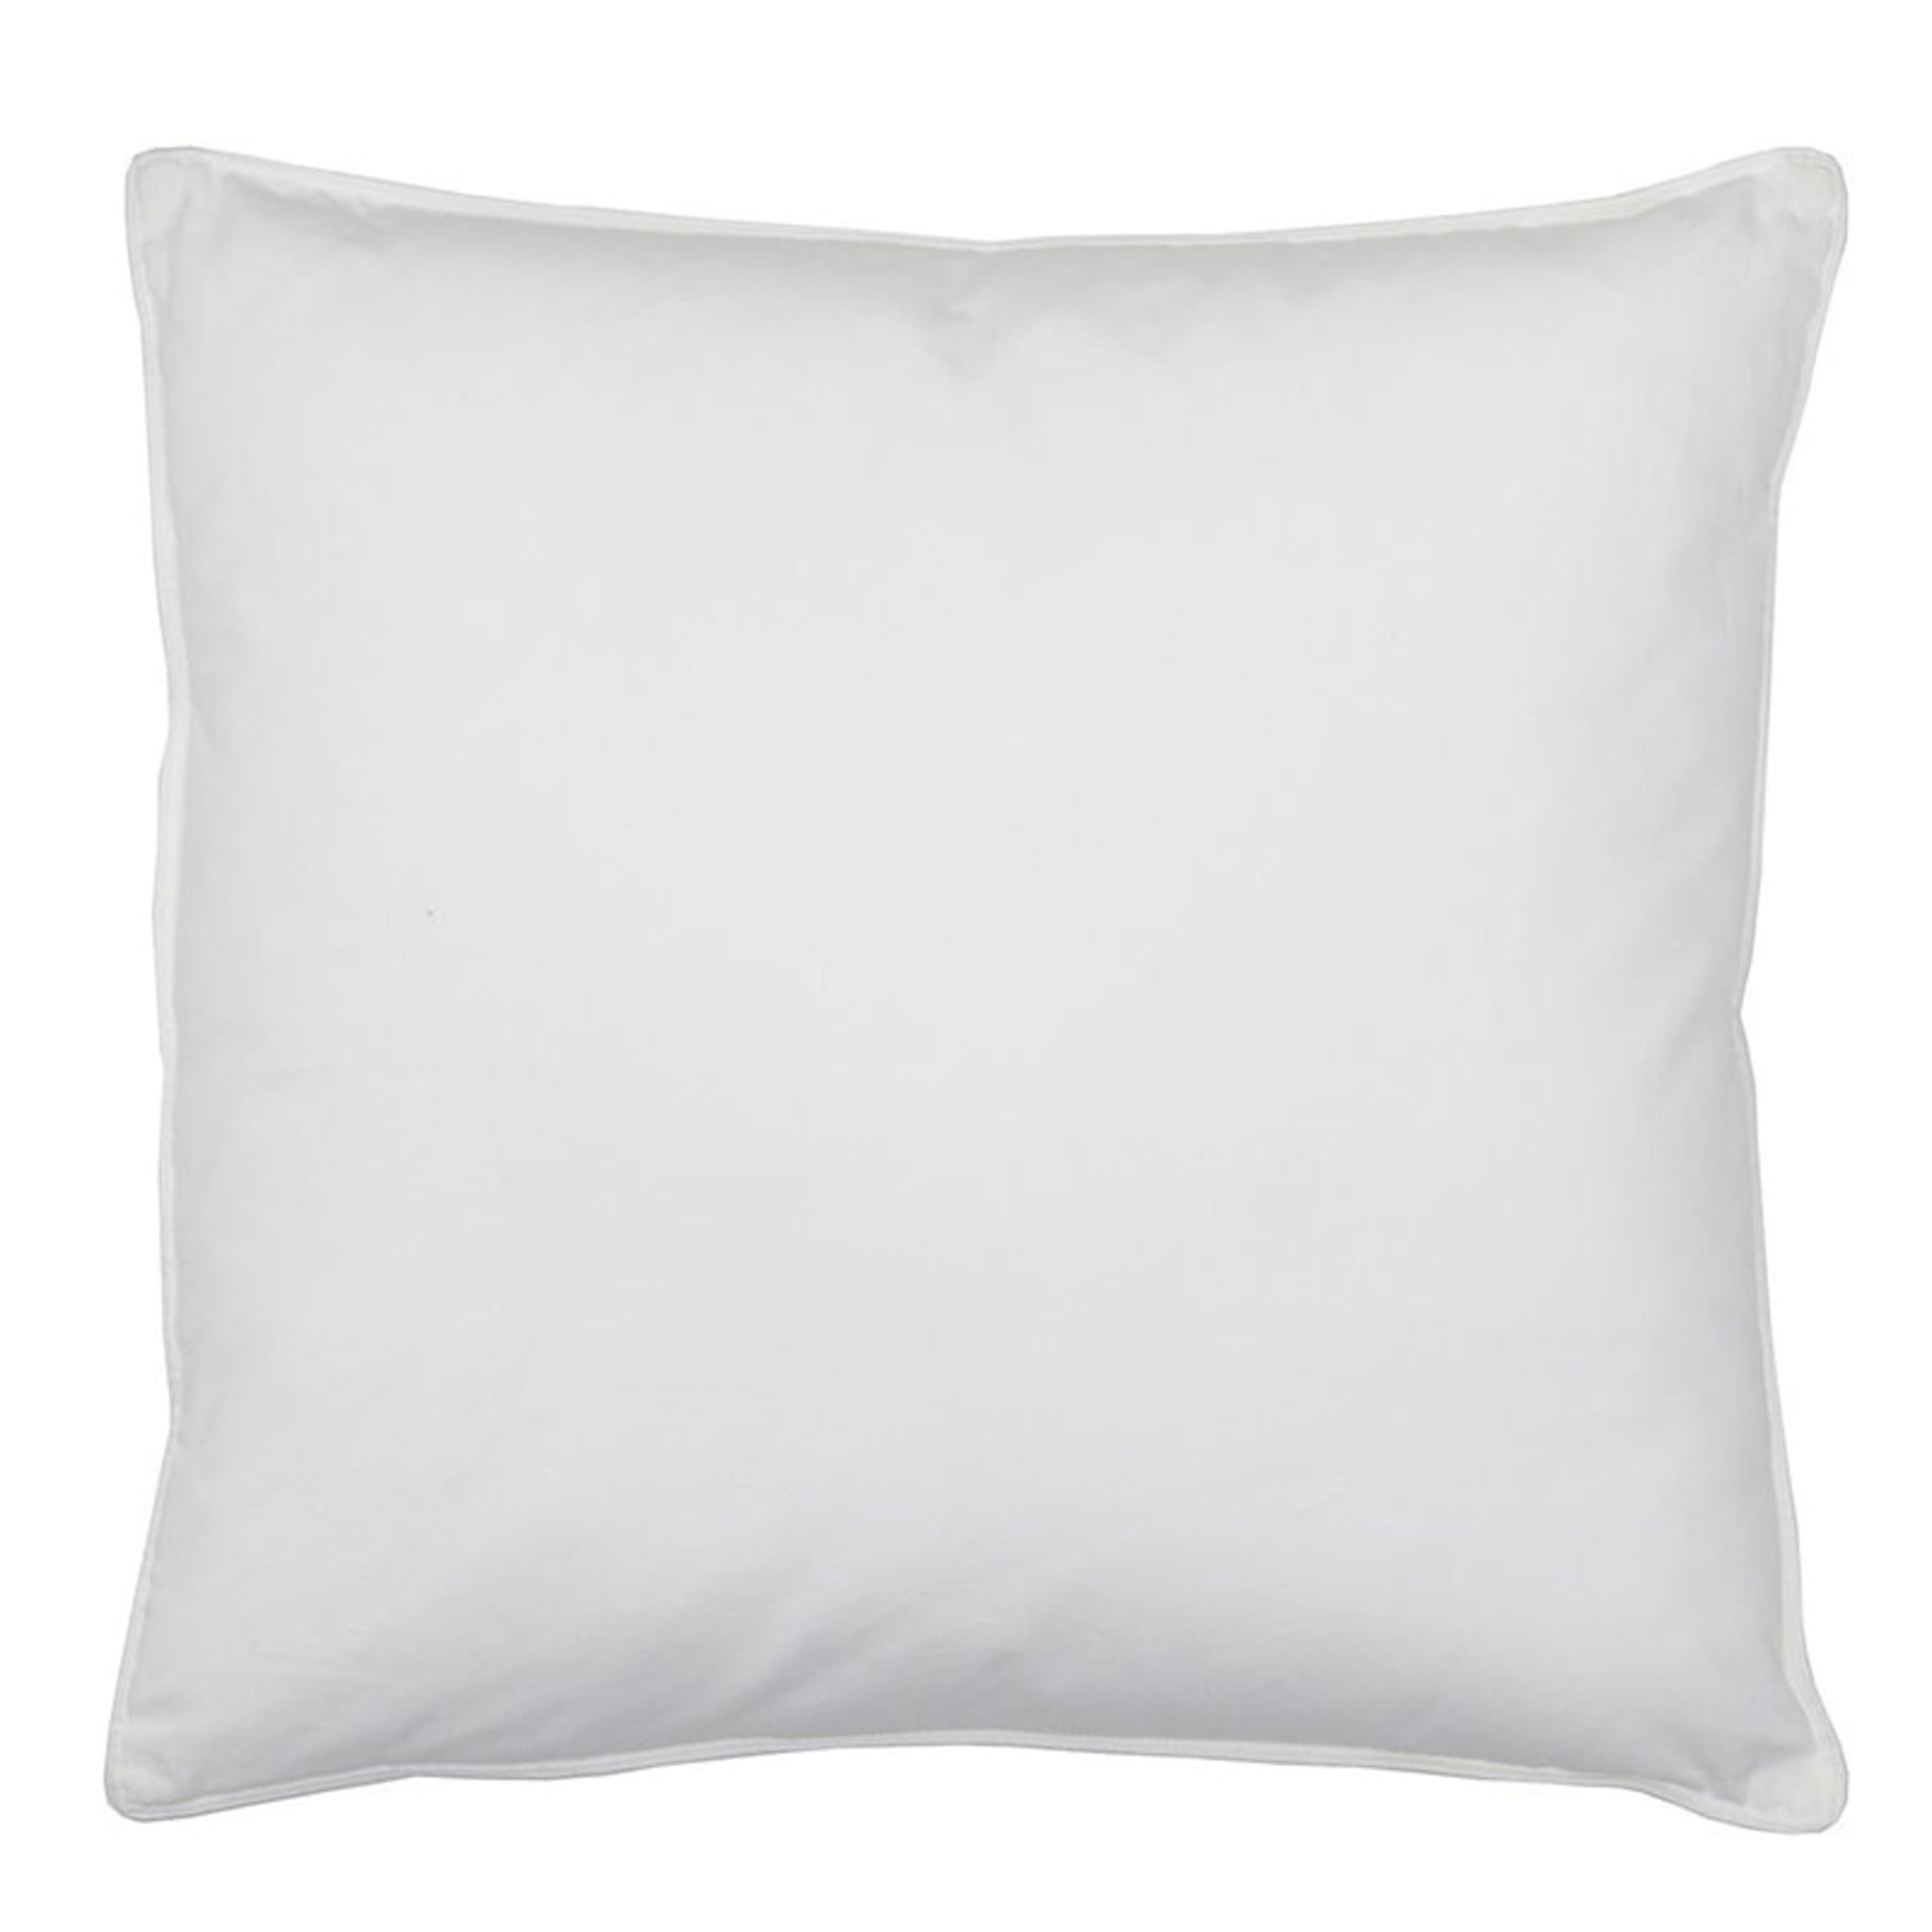 Company Essentials™ Feather and Down Square Pillow Insert | The Company Store